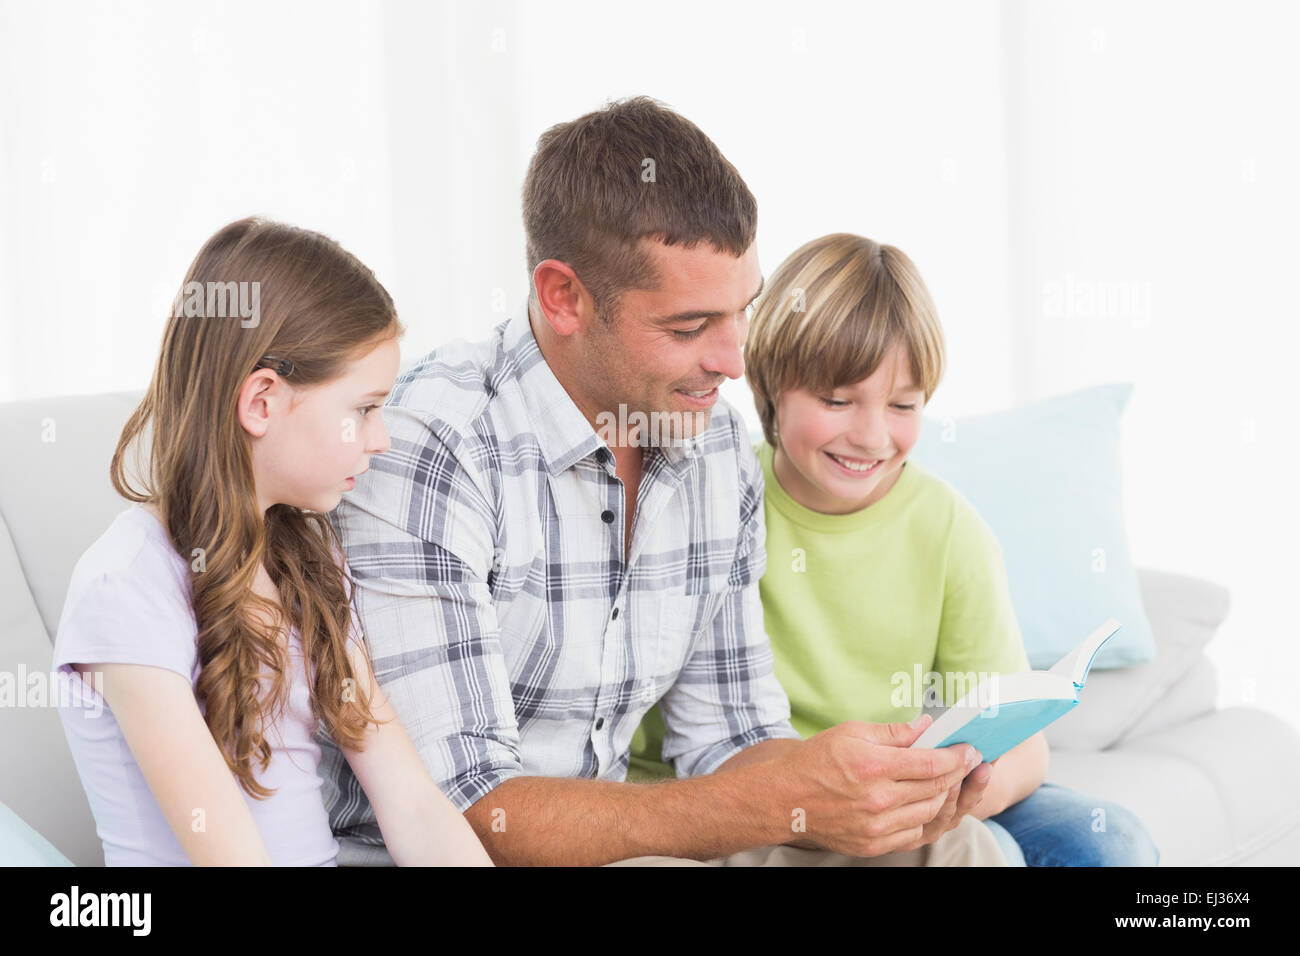 Man telling story to children while sitting on sofa Stock Photo